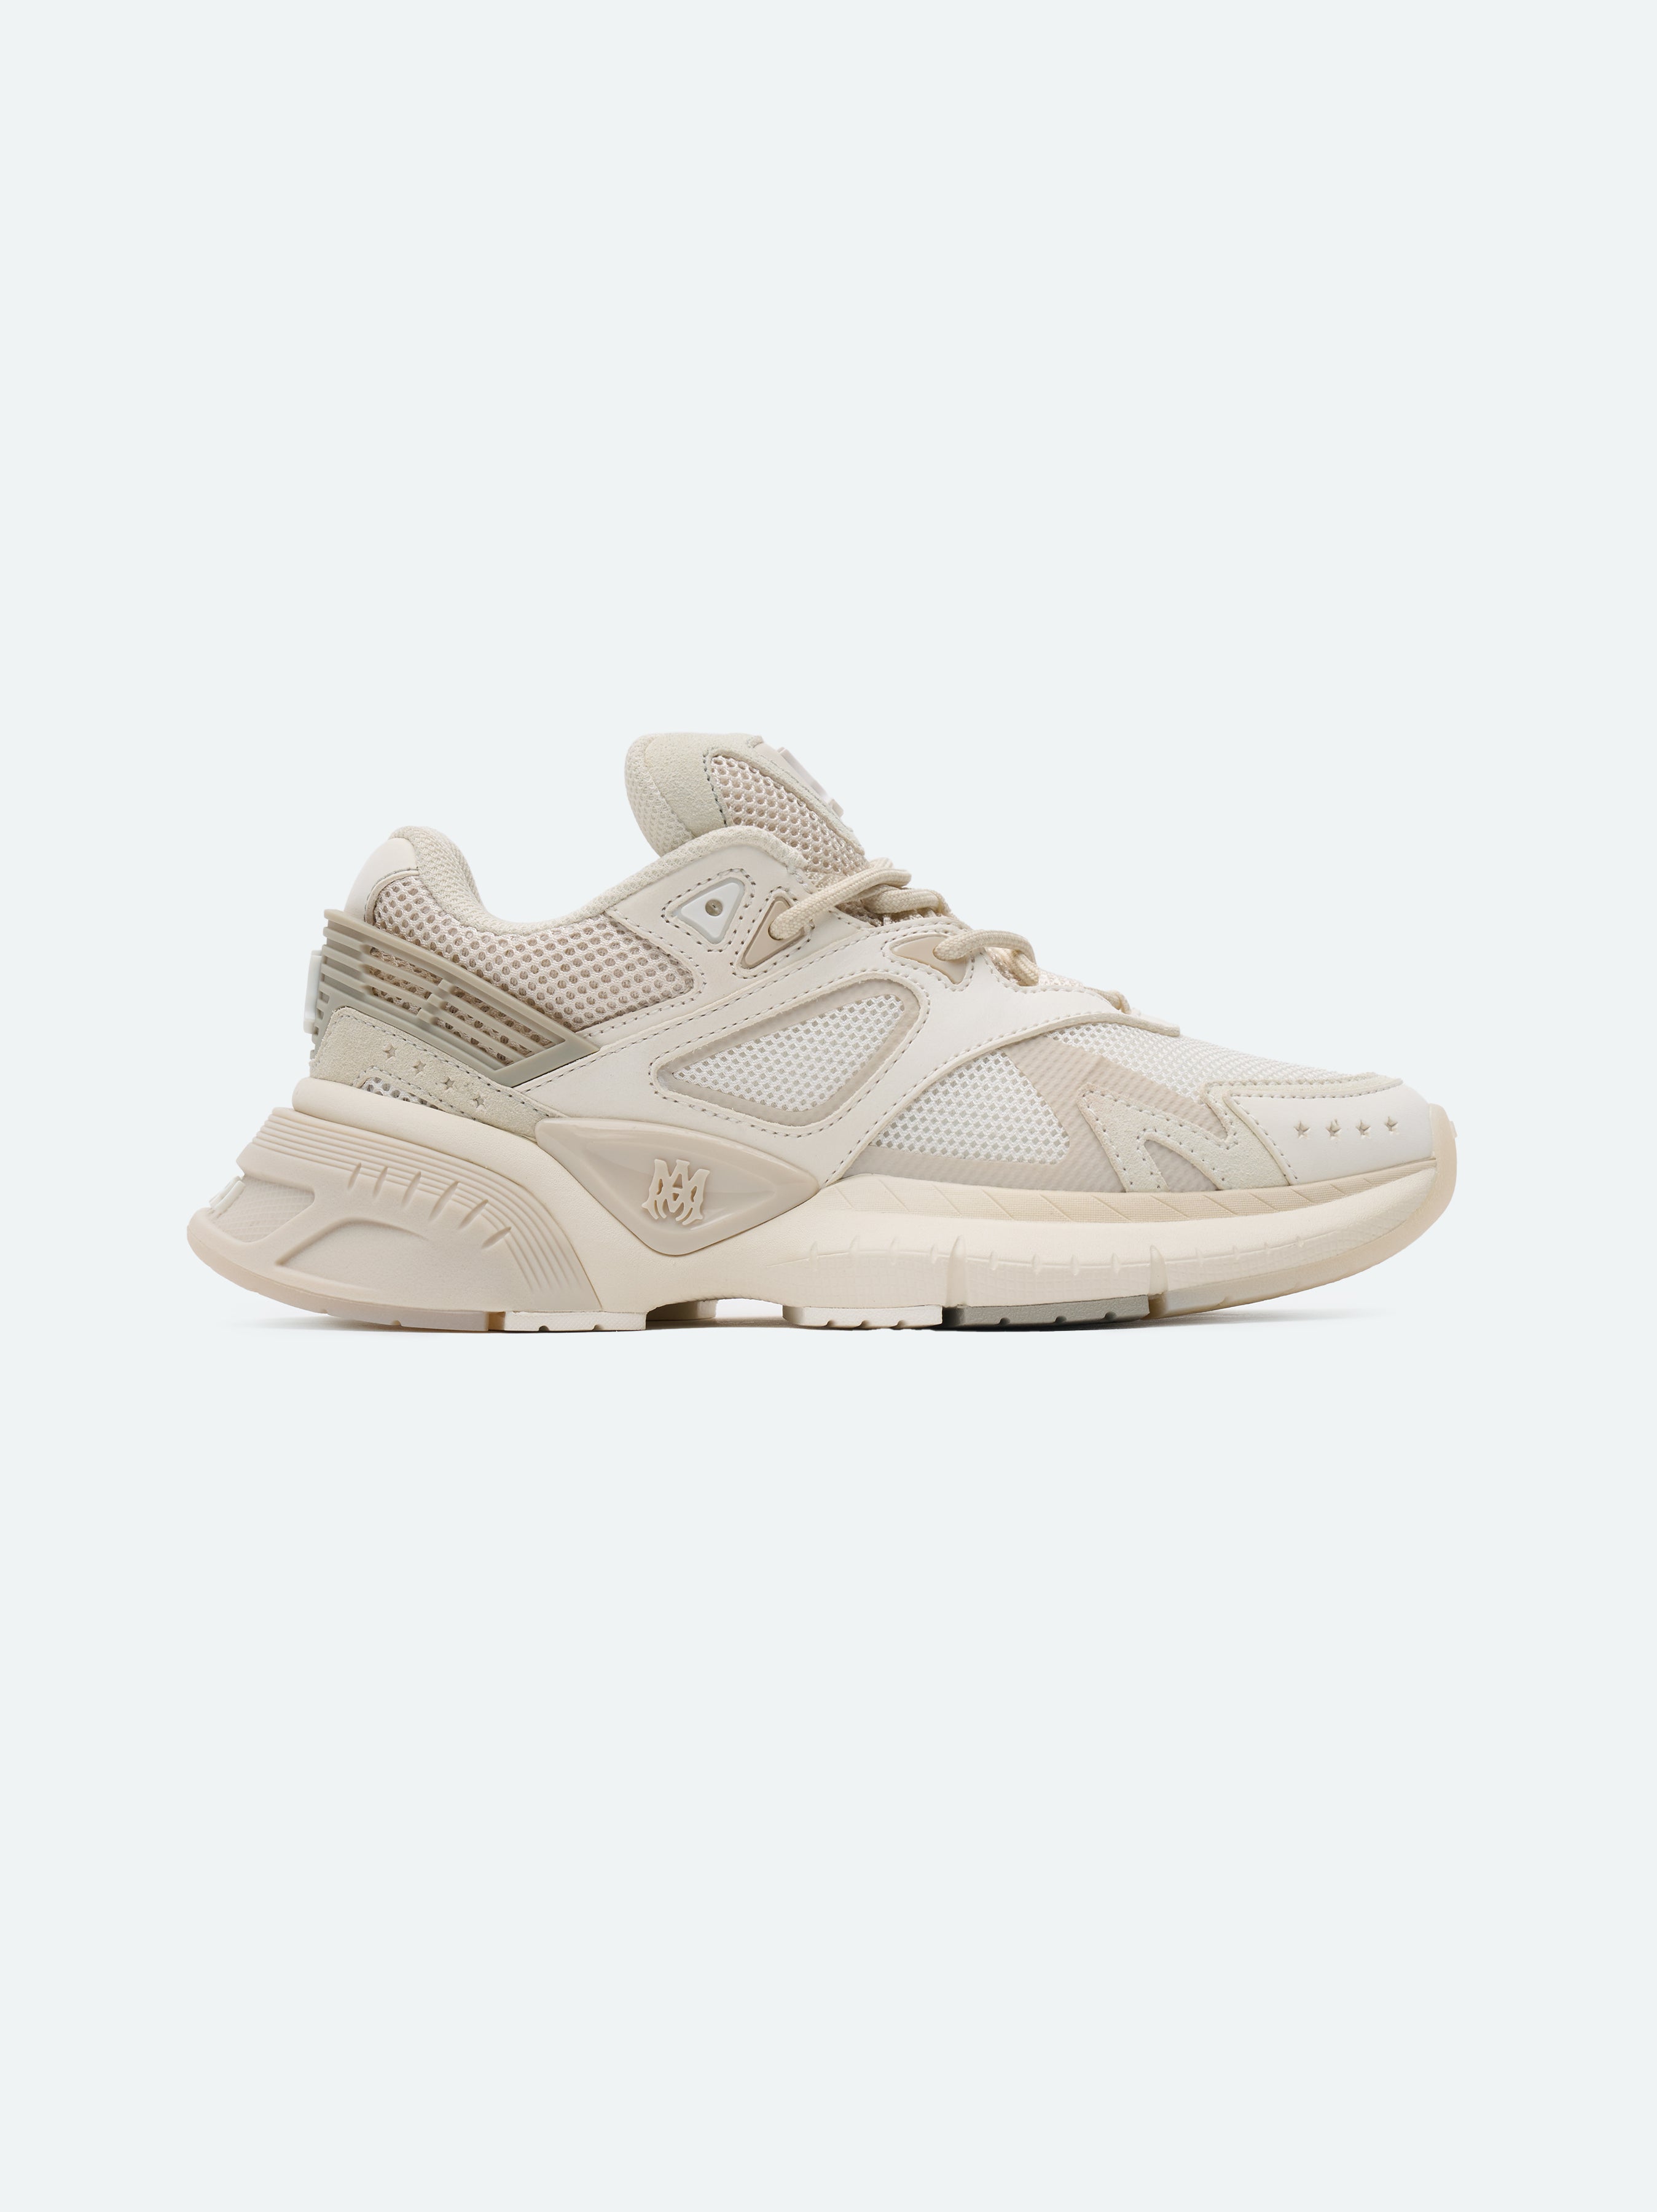 Product WOMEN - MA RUNNER - Alabaster featured image